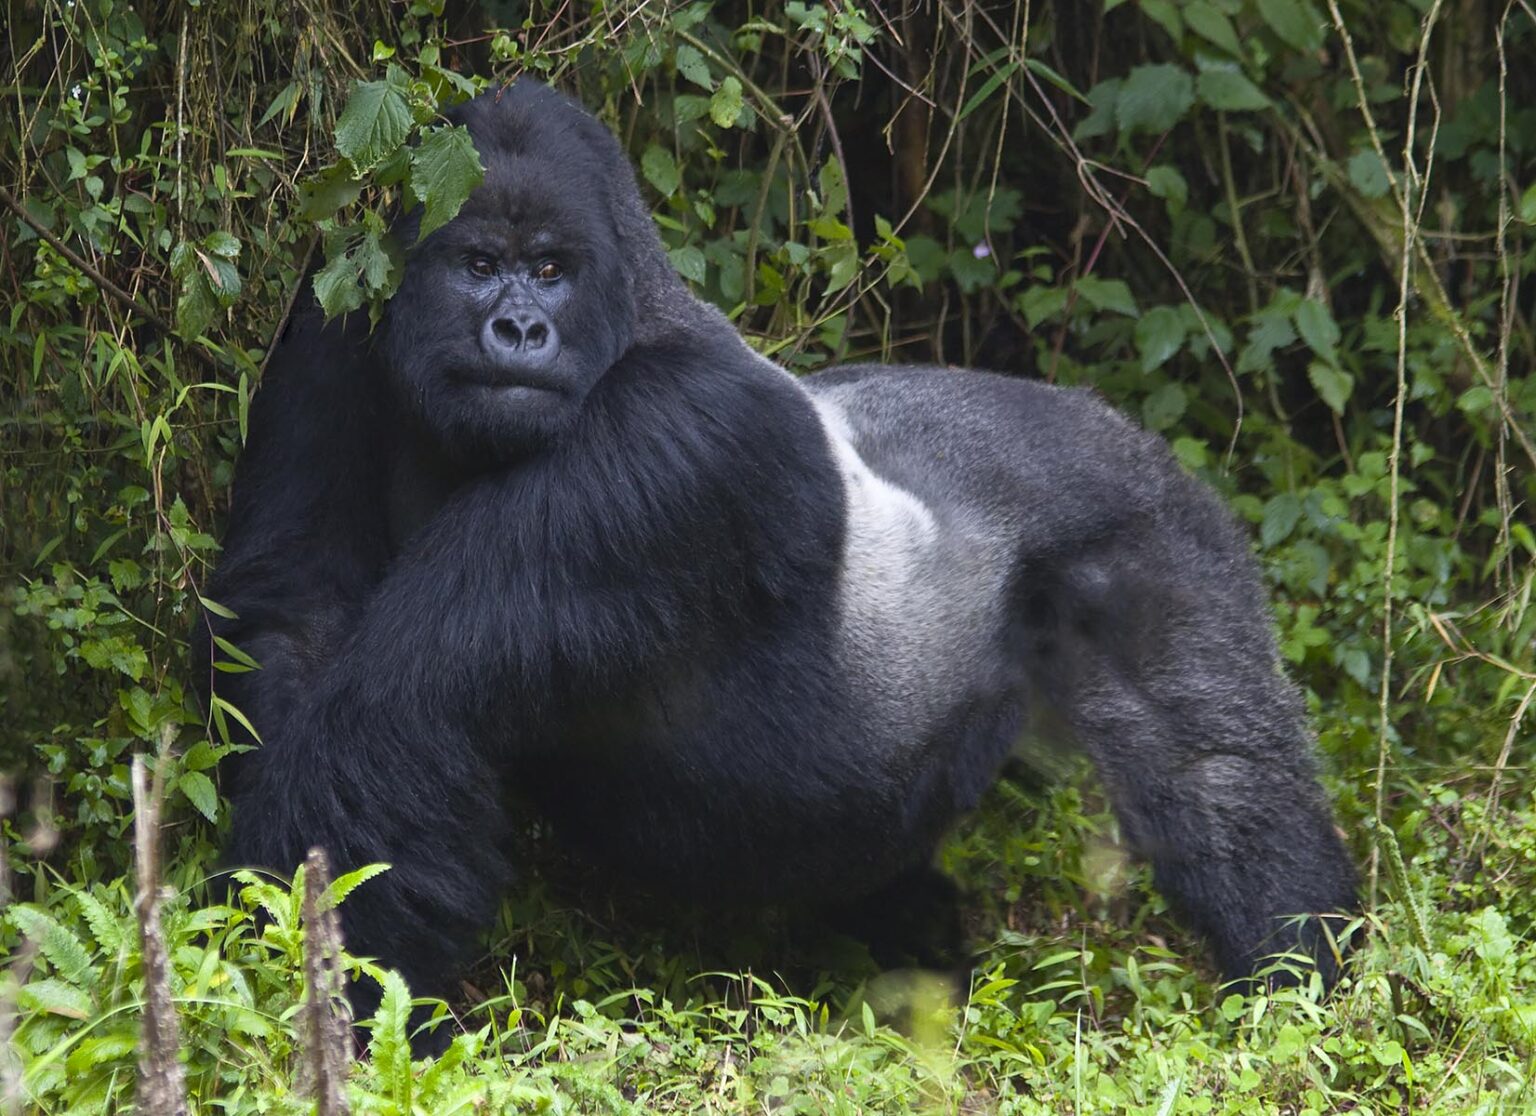 GORUNDHA, of the SABYINYO GROUP, is the largest alpha male SILVER BACK in VOLCANOES NATIONAL PARK - RWANDA